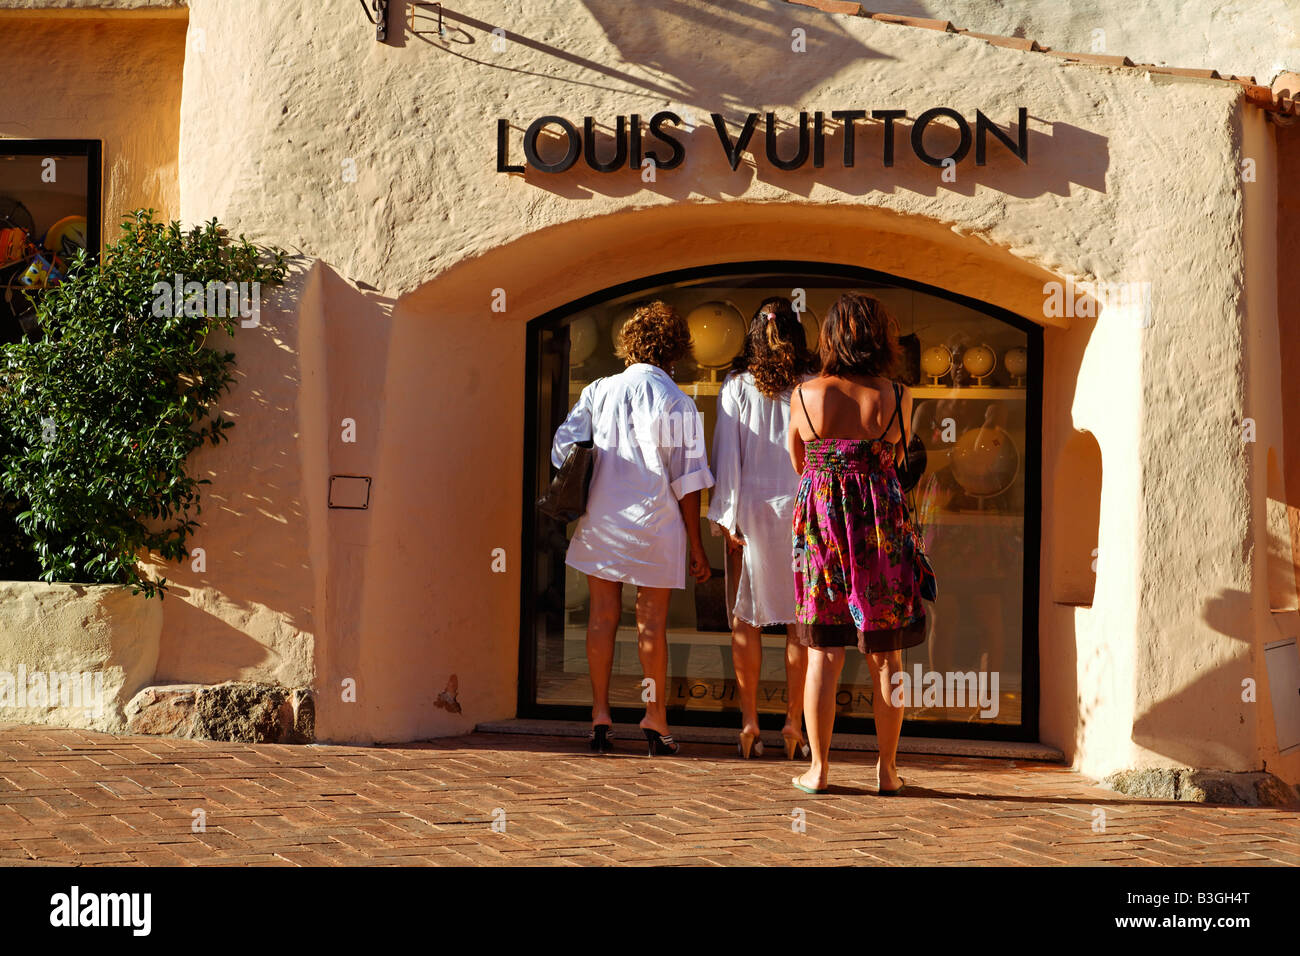 Louis Vuitton has opened a pop-up store in Sardinia